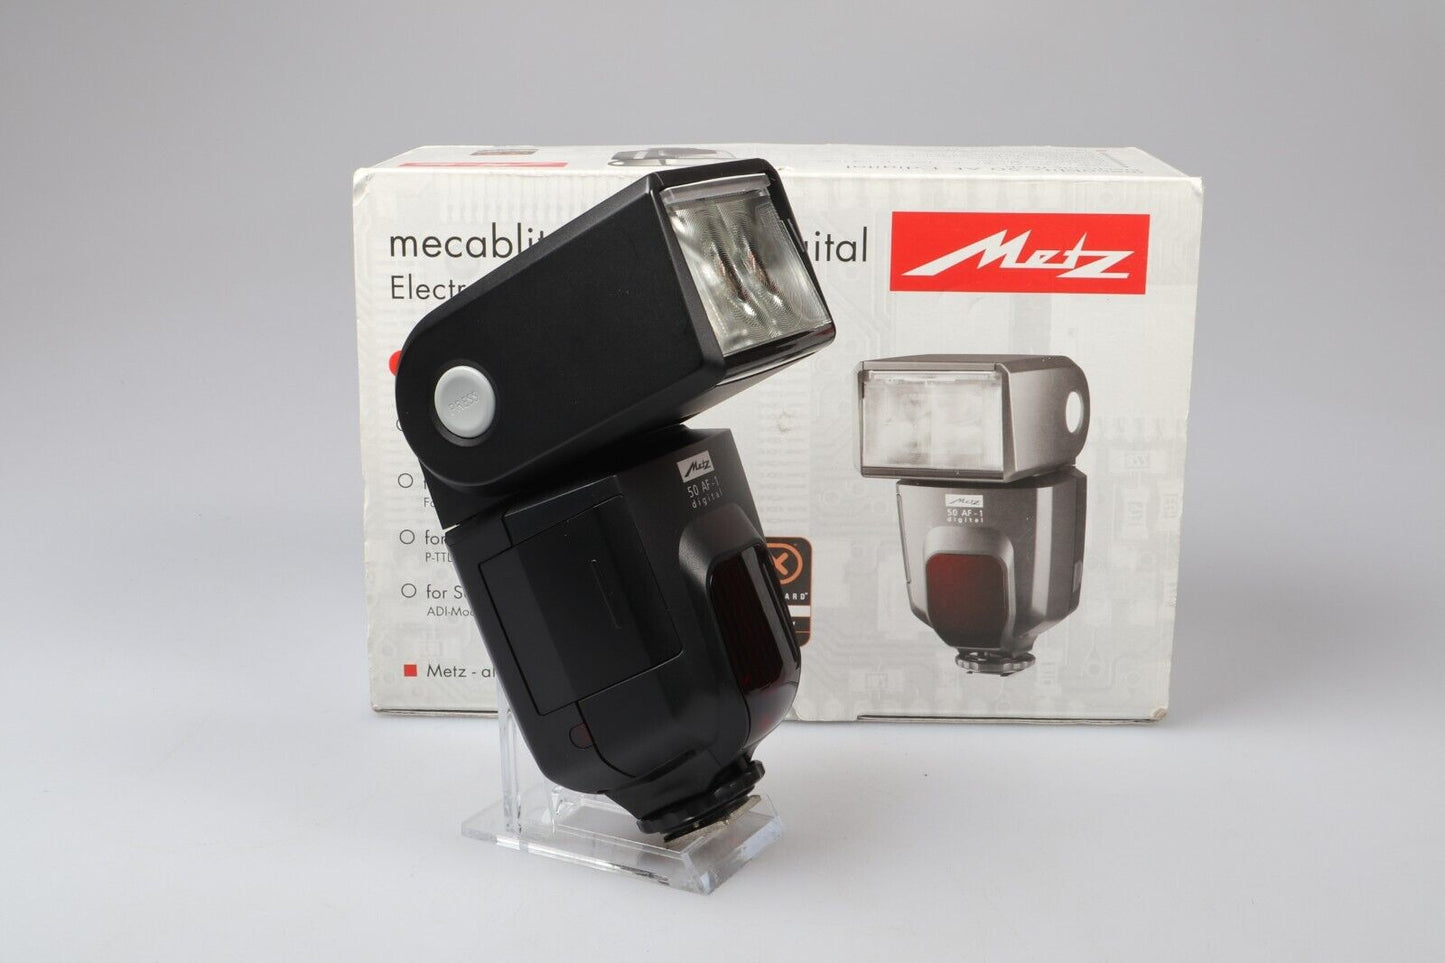 Metz Mecablitz 50 AF-1 | Electronic Flash For Canon